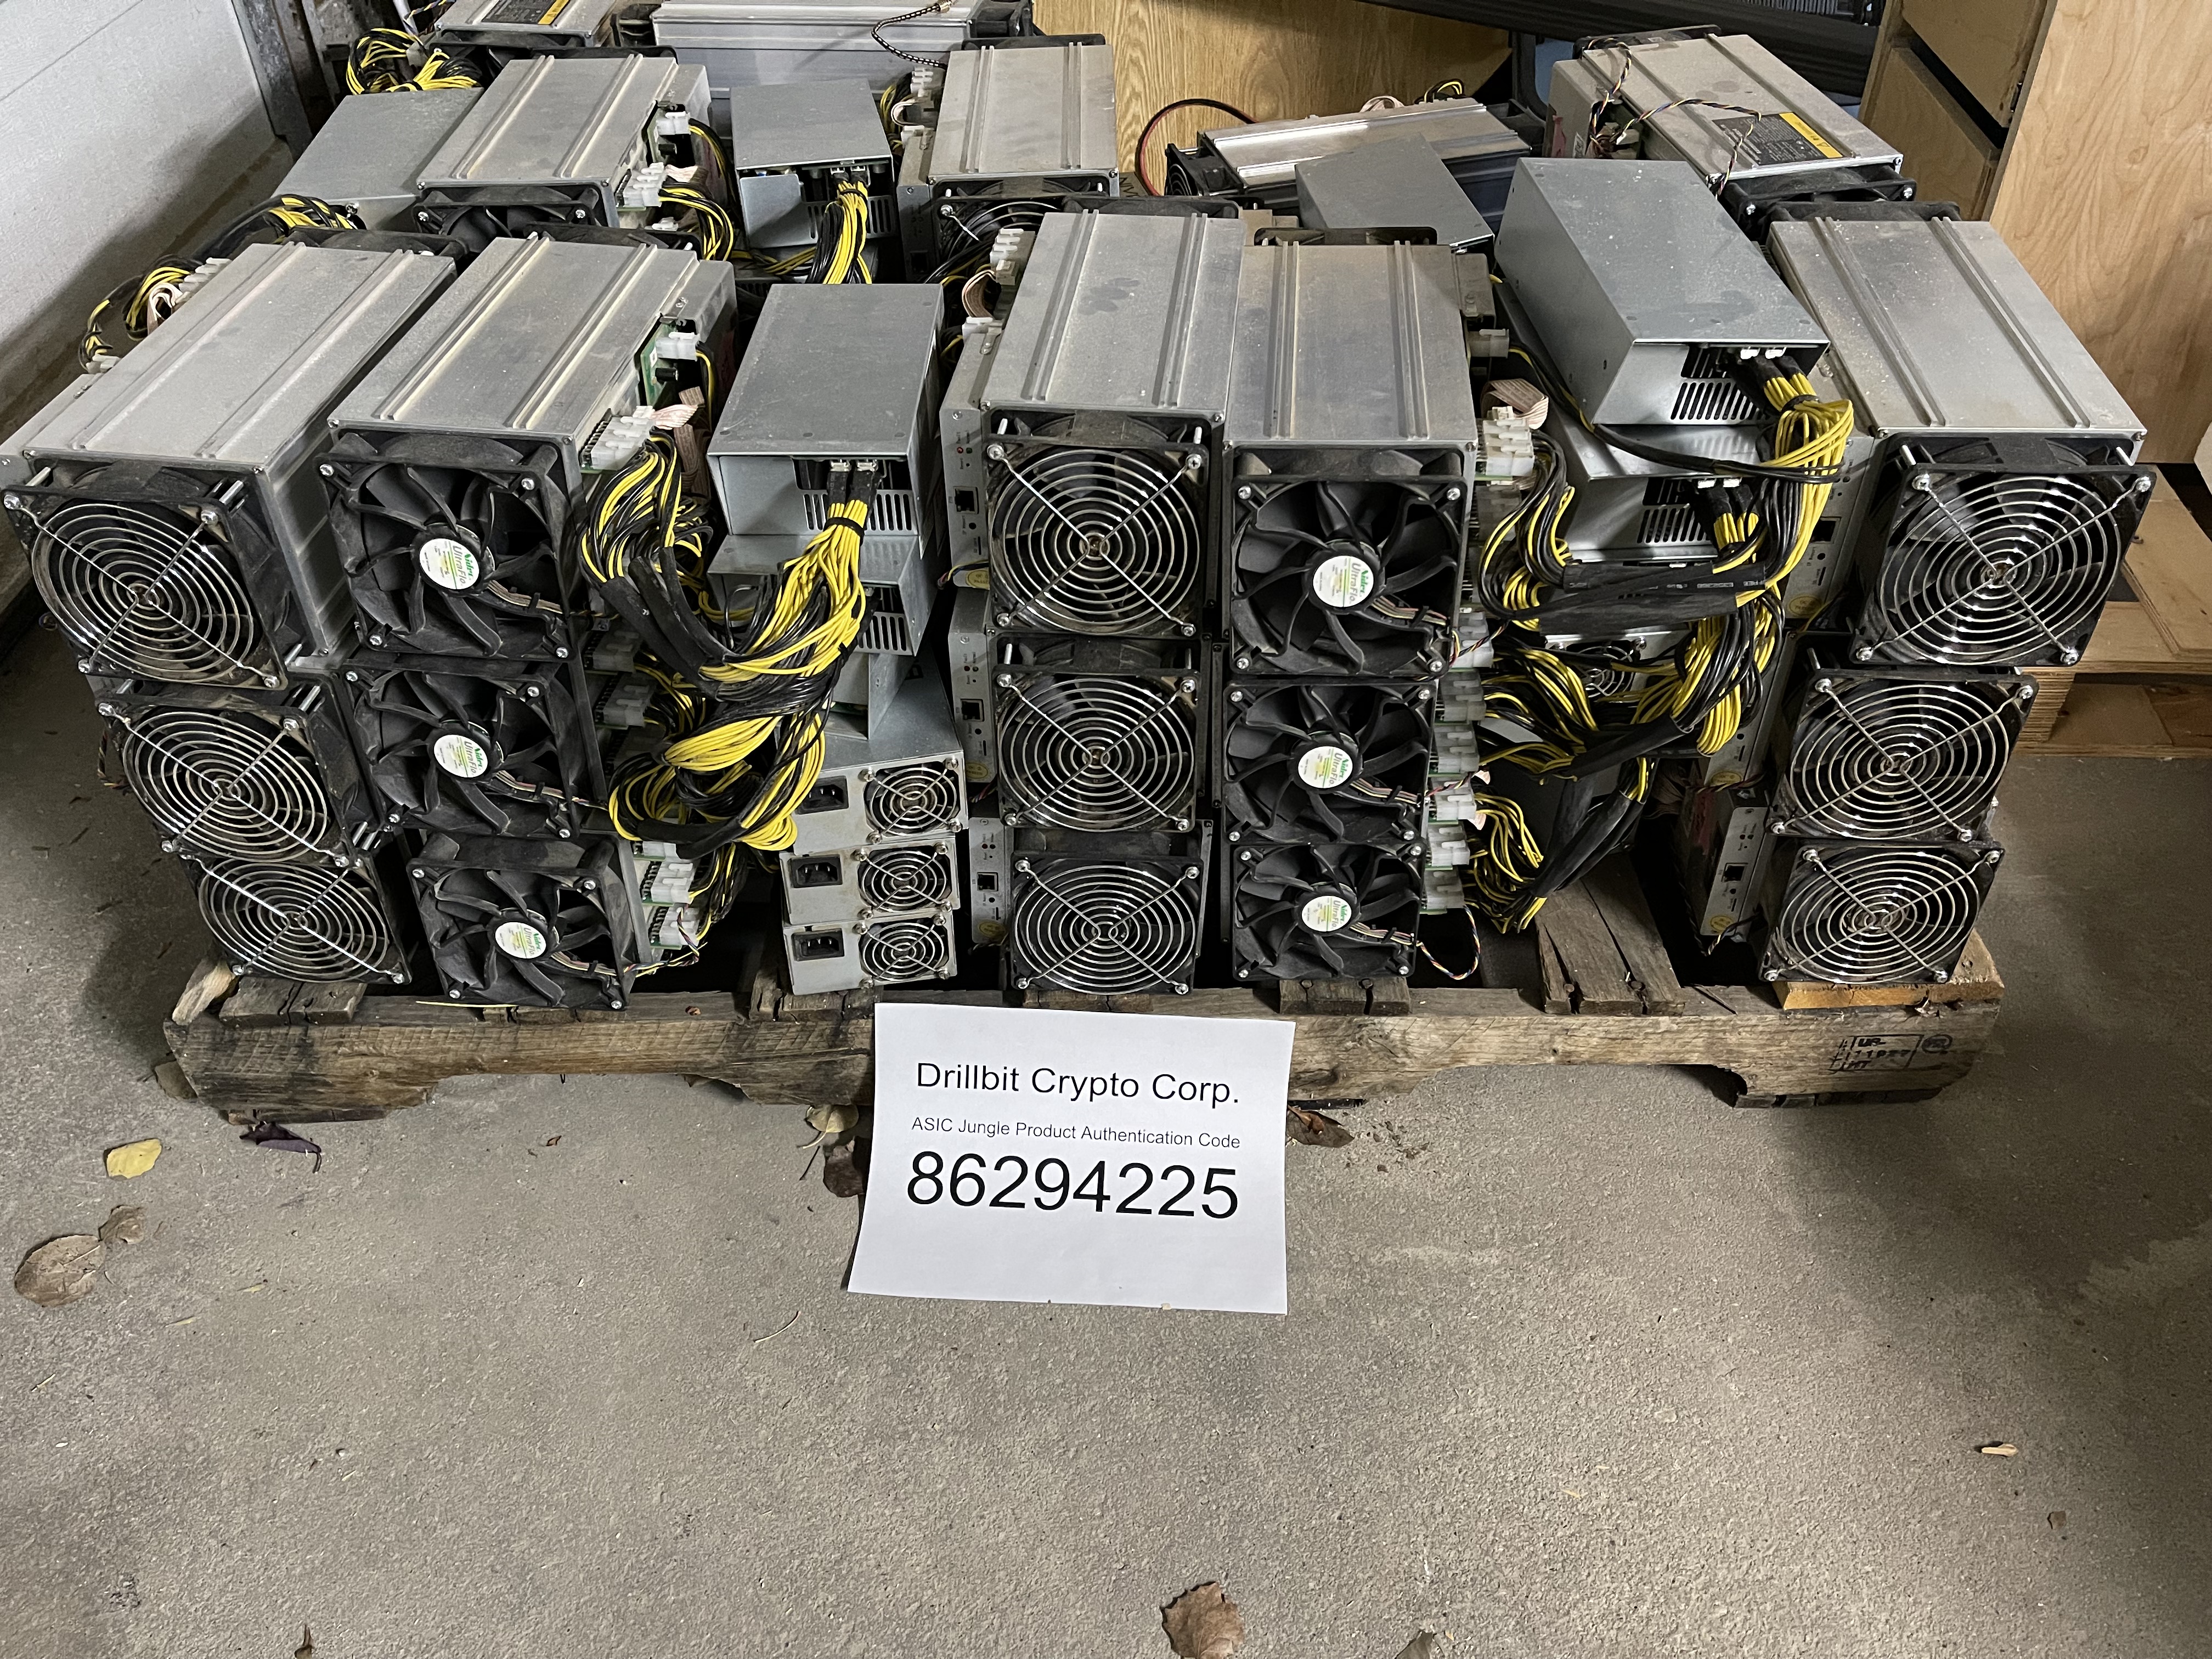 Antminer S9's used